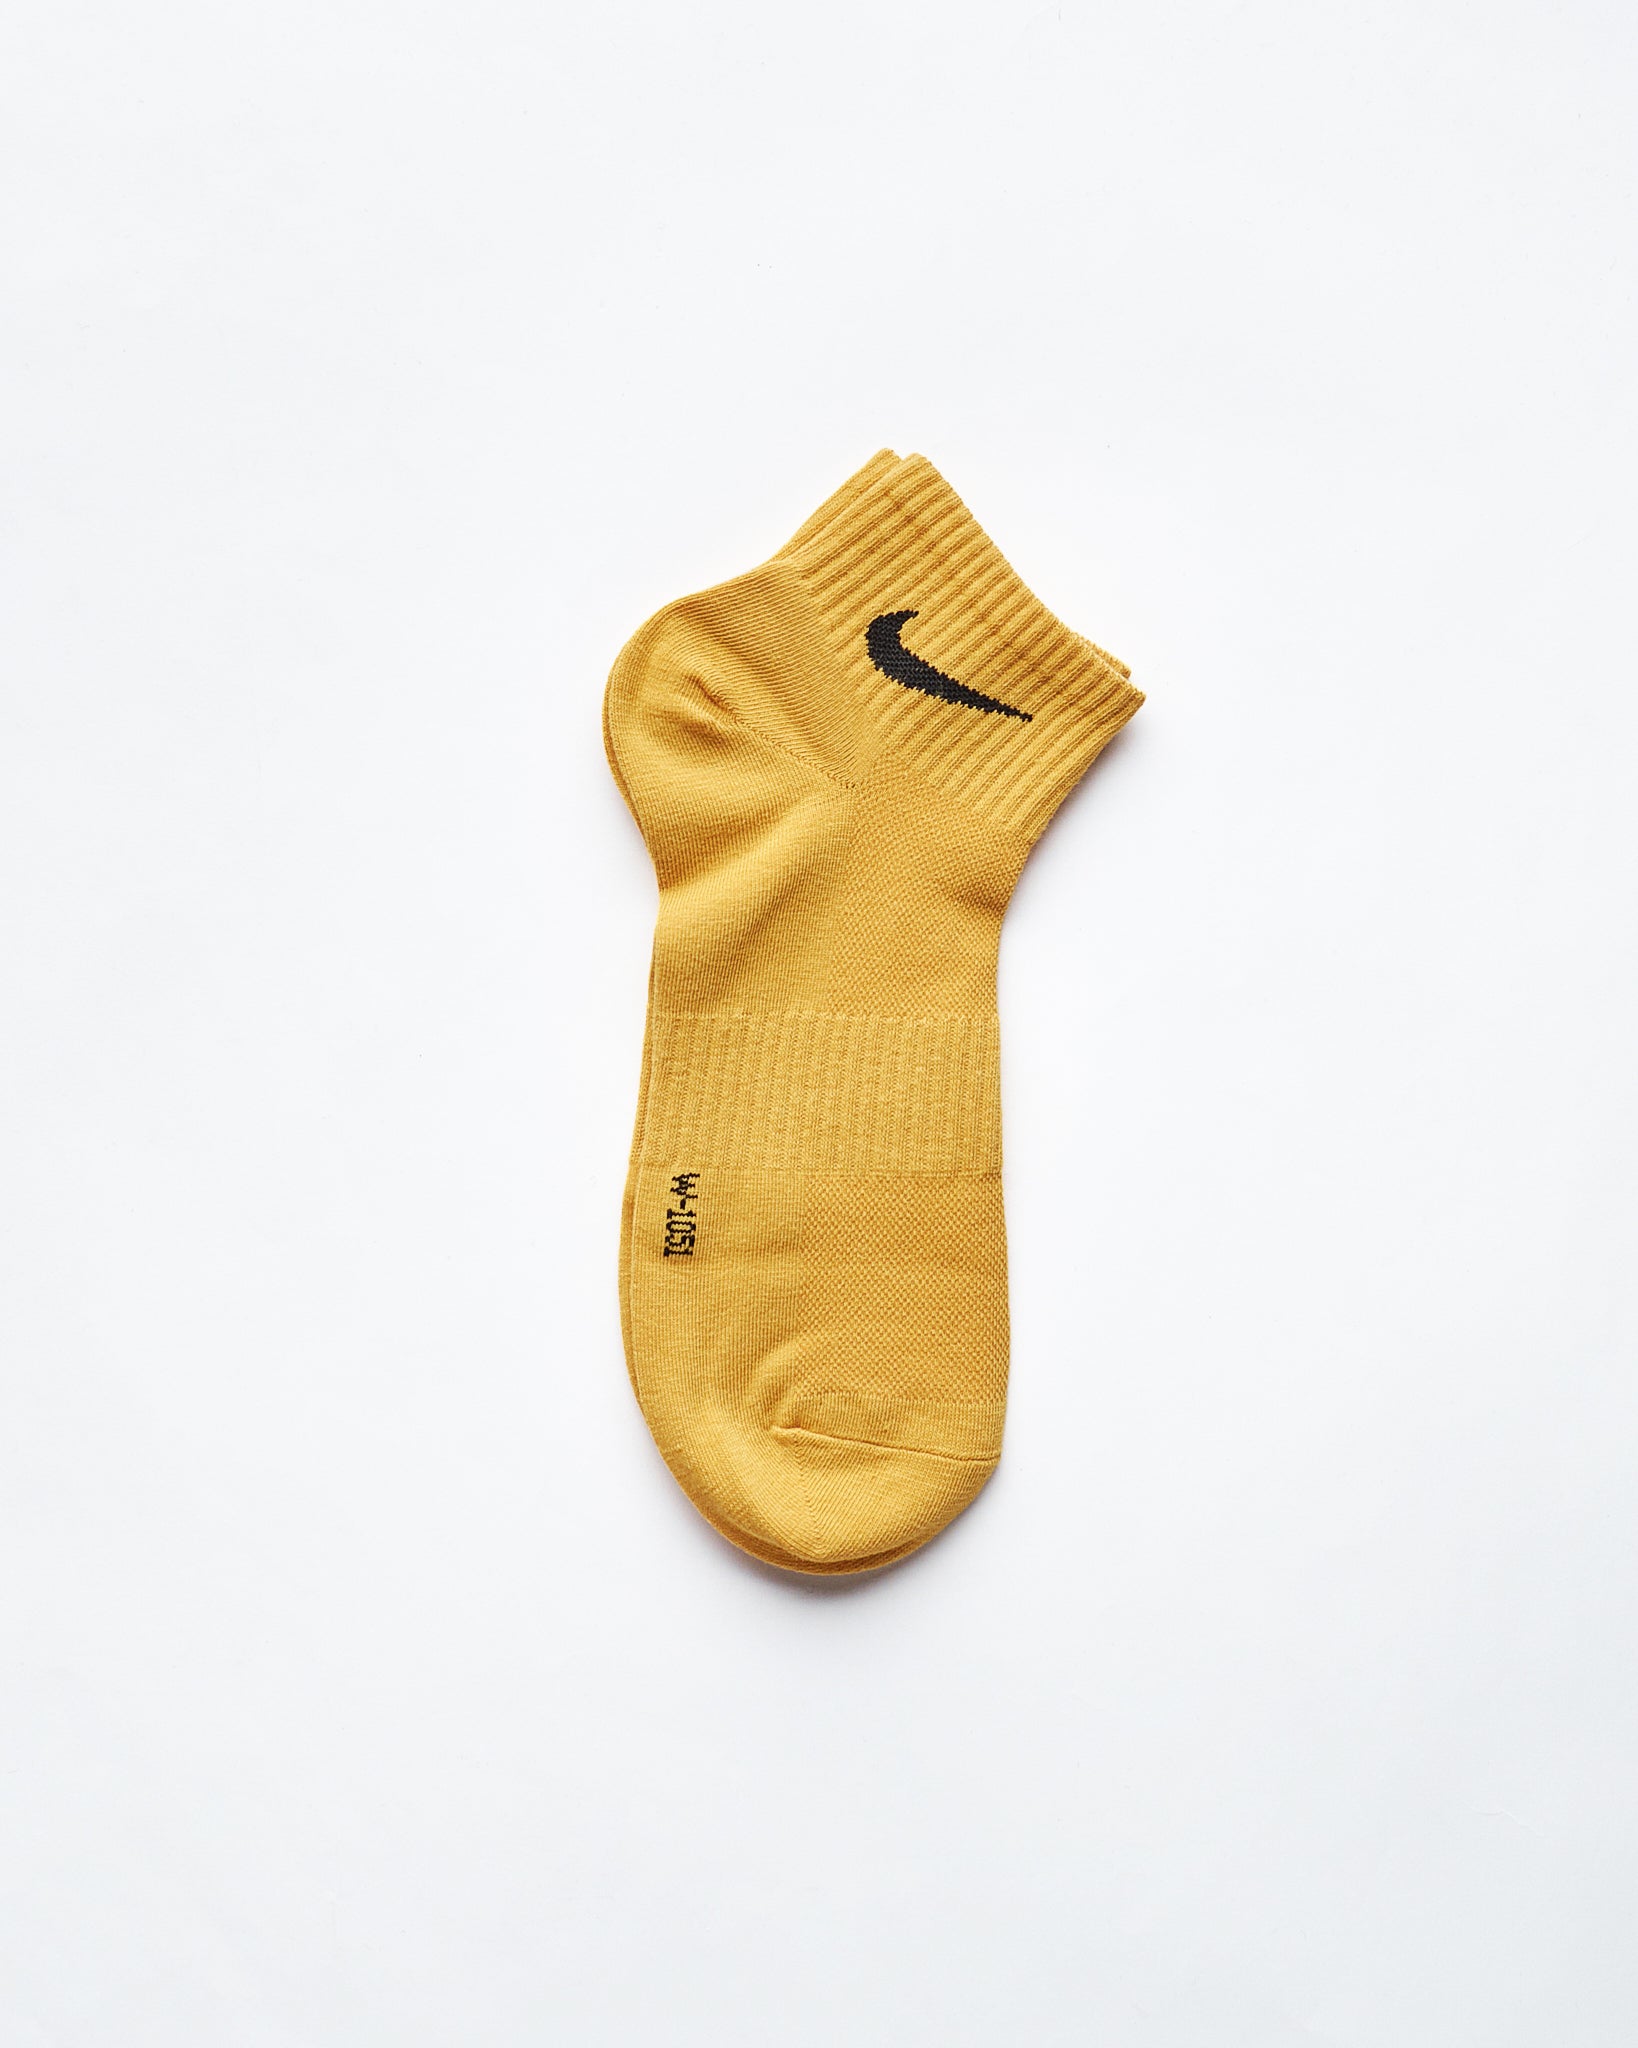 MOI OUTFIT-Logo Embroidered 5 Pairs Low Cut Socks 13.90